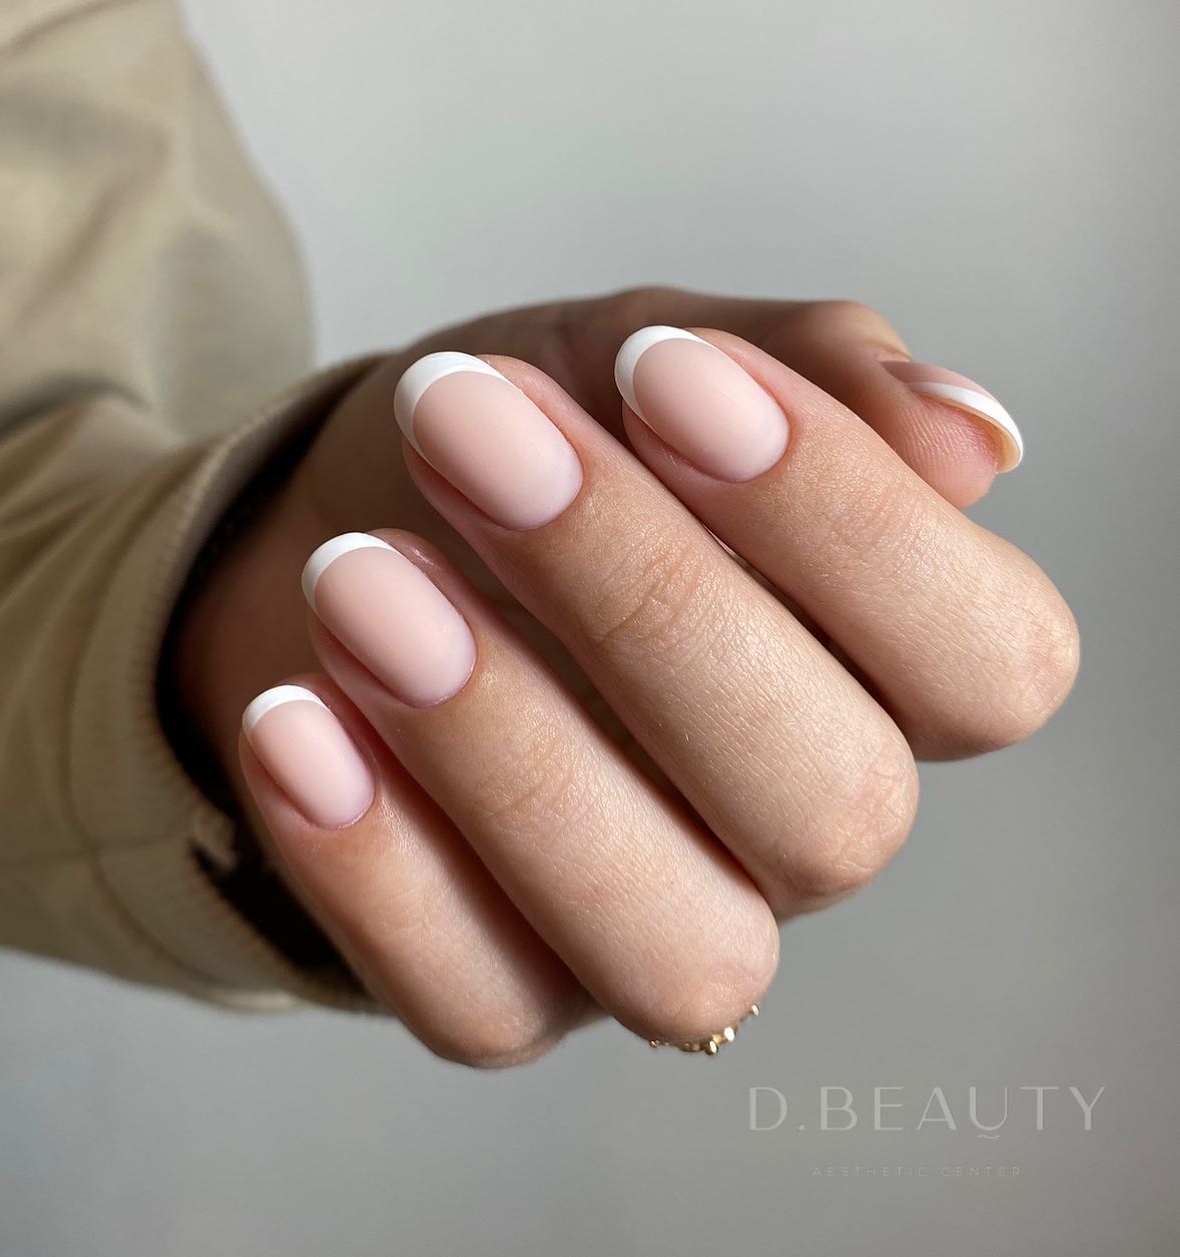 Short Oval Nails with White French Tips